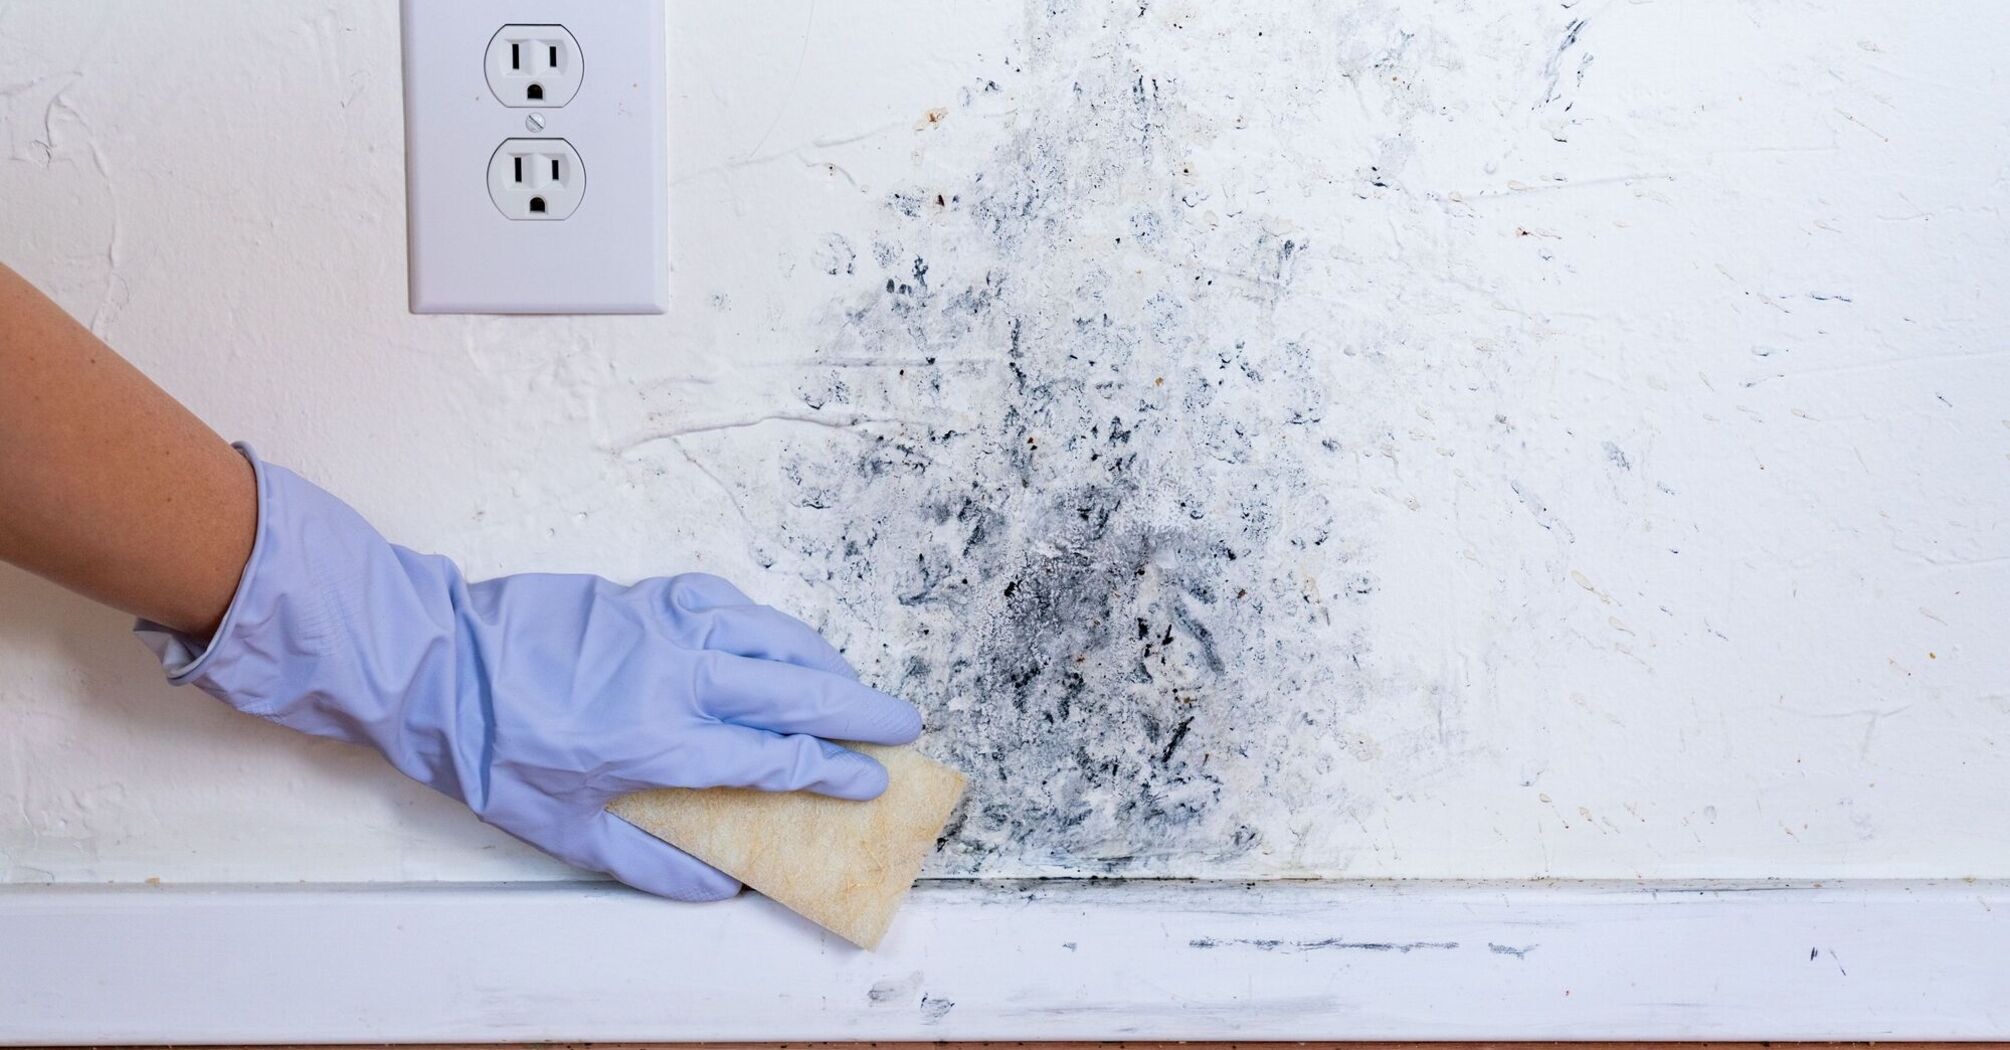 How to get rid of fungus on walls